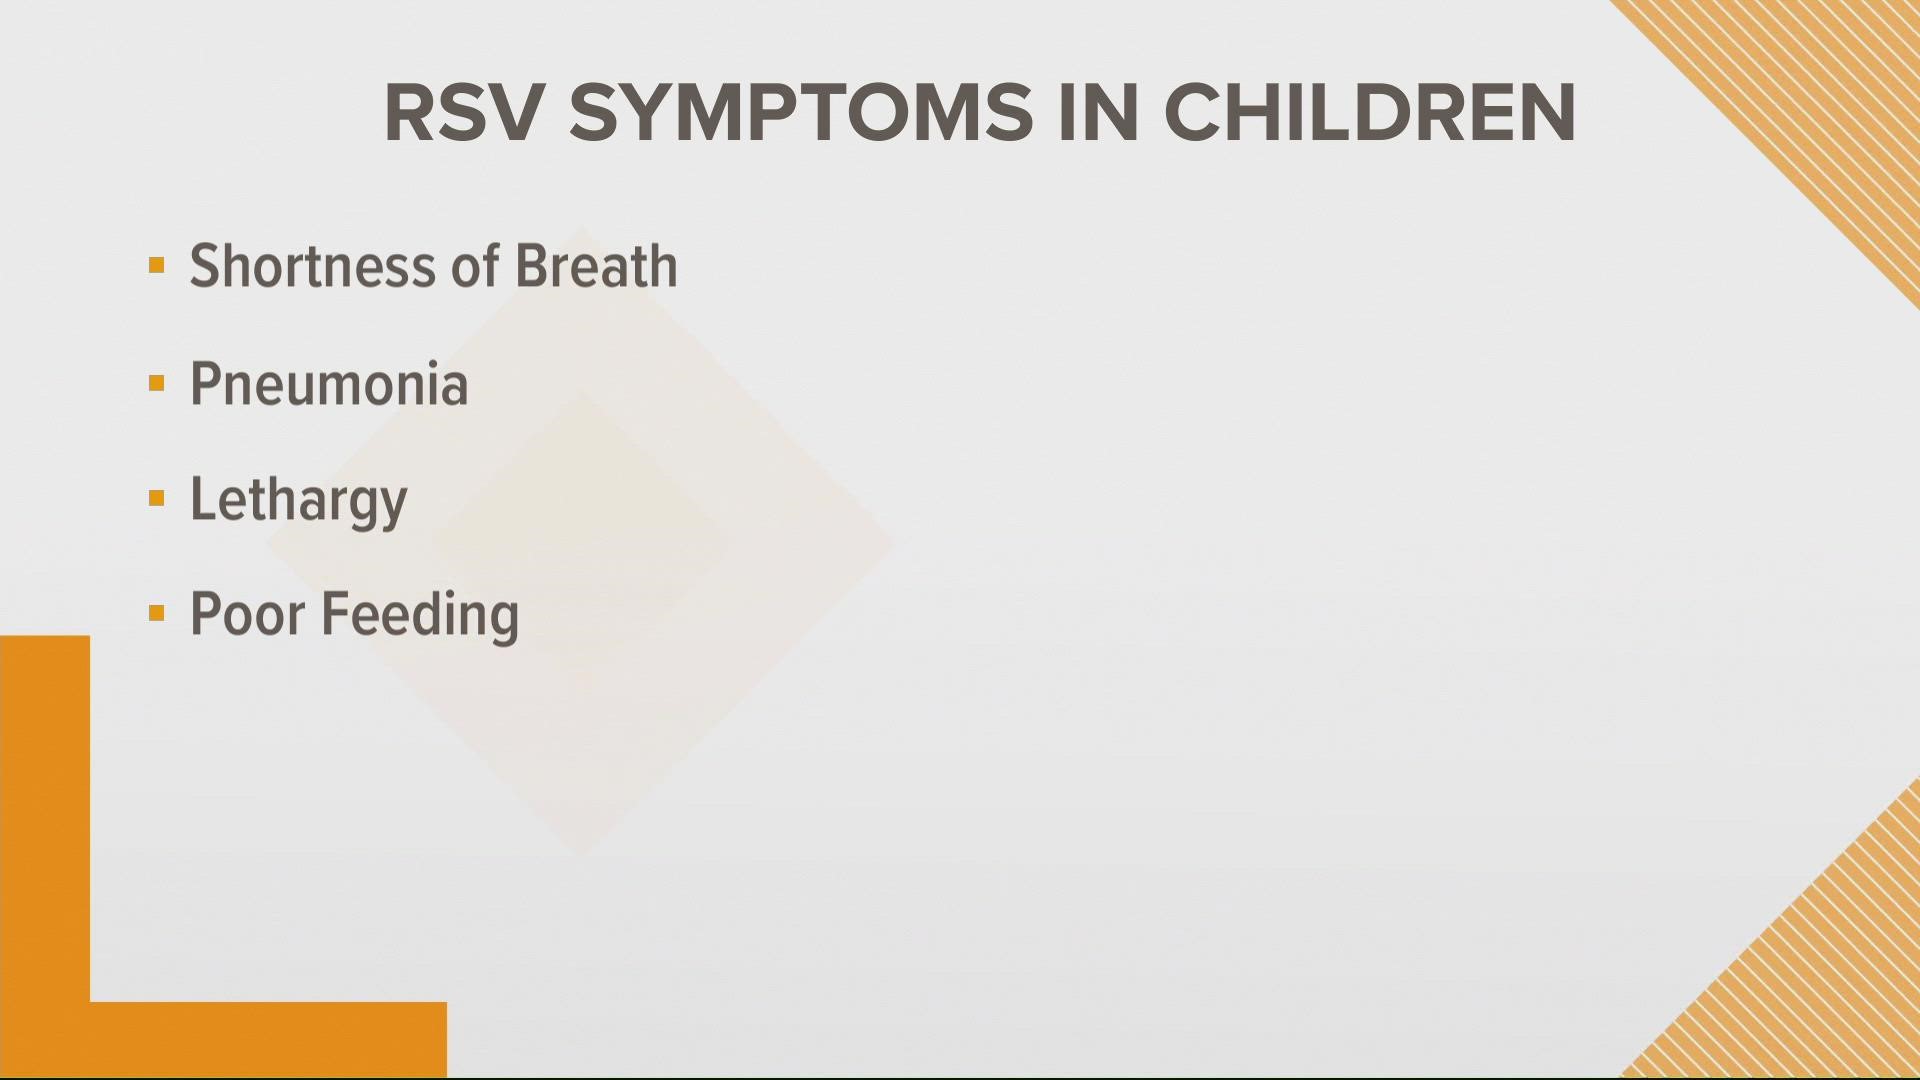 Doctors are seeing more cases of RSV outside of cold and flu season. Our ABC10 health expert says cases in children are more concerning.